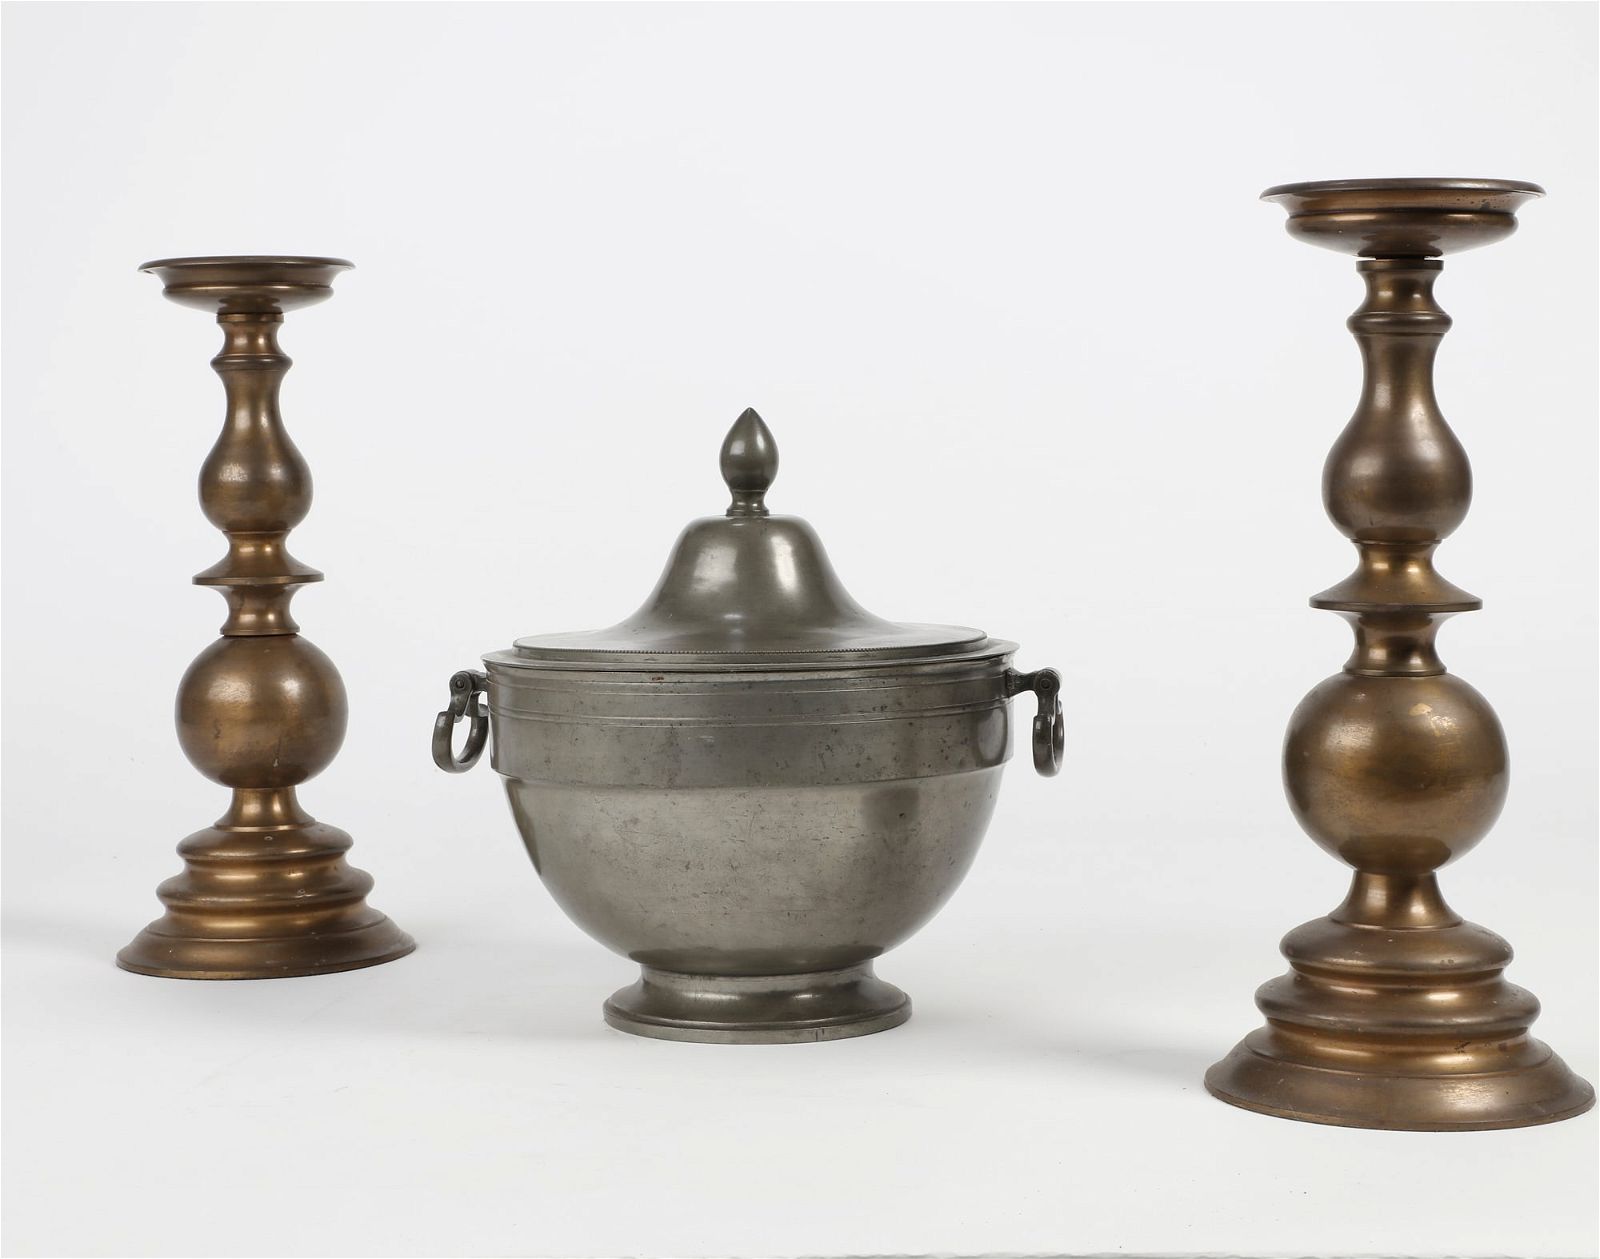 A DUTCH PEWTER COVERED TUREEN, 18TH